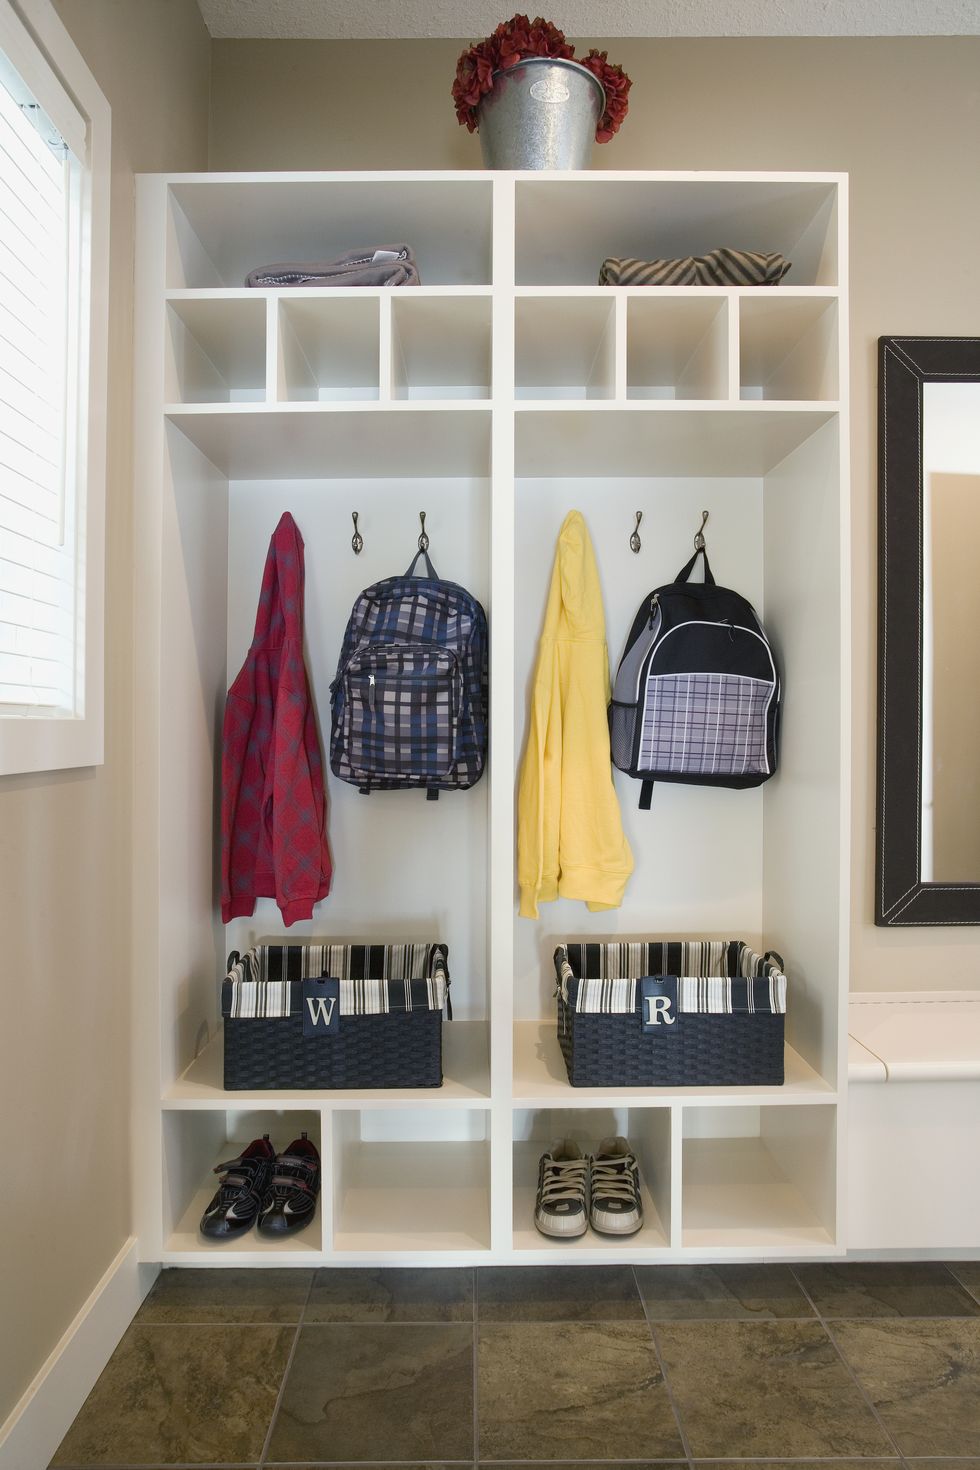 23 Open Closet Ideas To Make Getting Dressed a Cinch